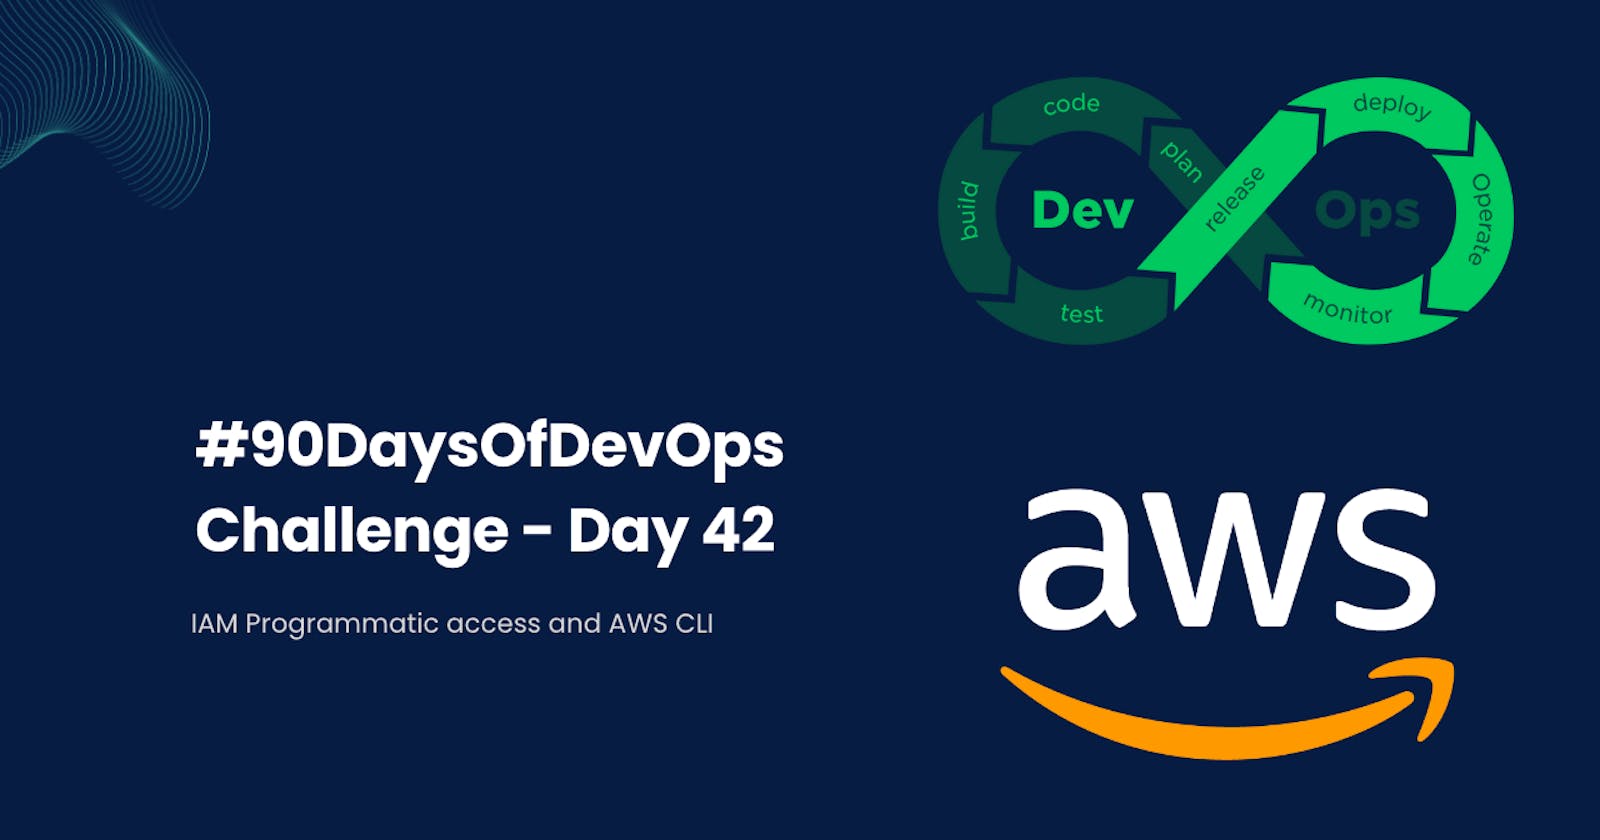 #90DaysOfDevOps Challenge - Day 42 - IAM Programmatic access and AWS CLI